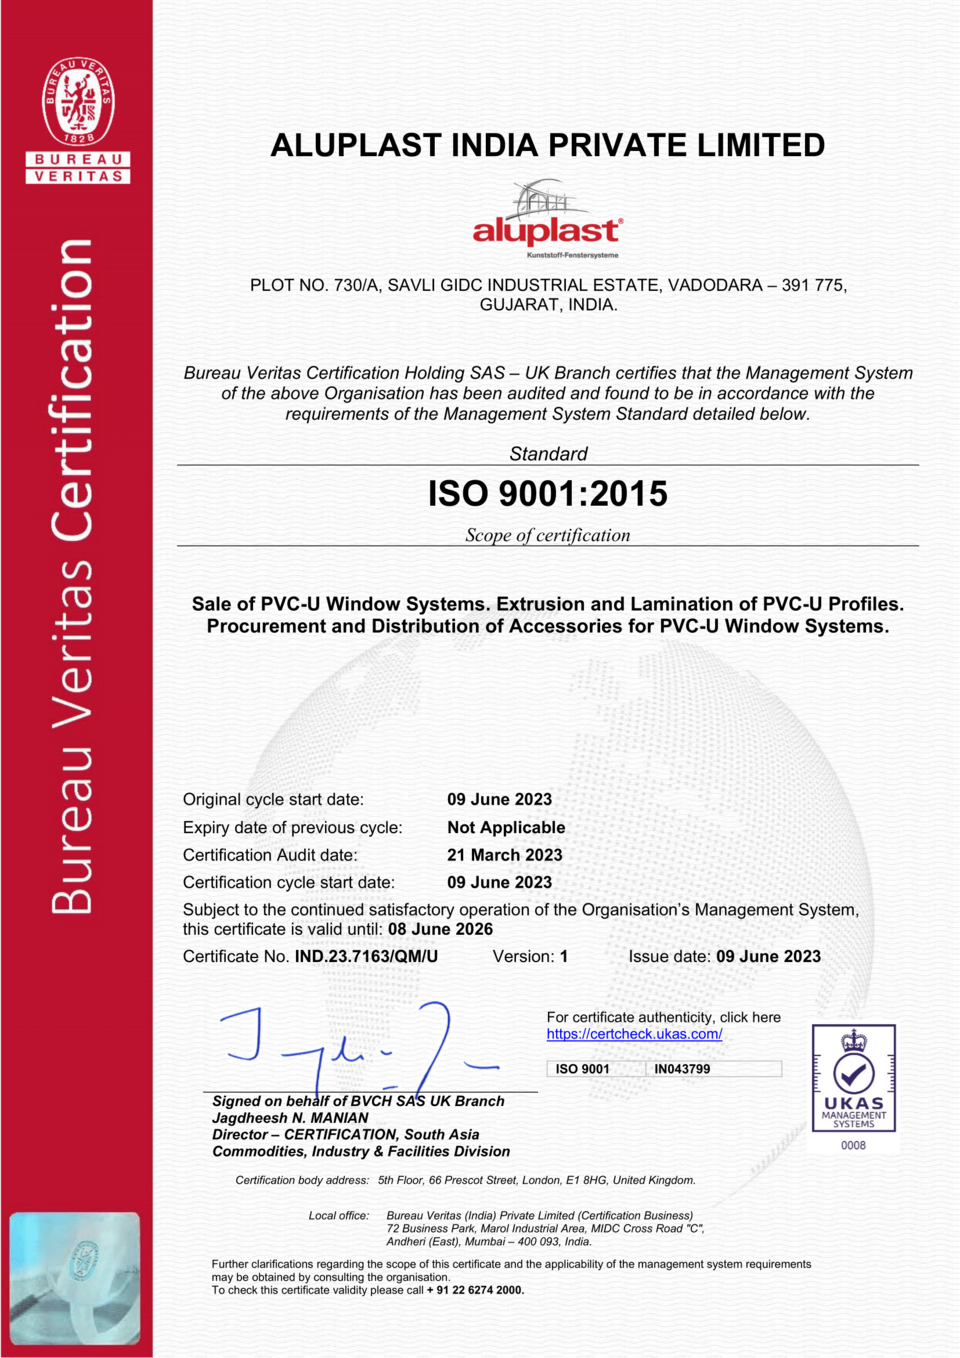 ISO certificate 9001:2015